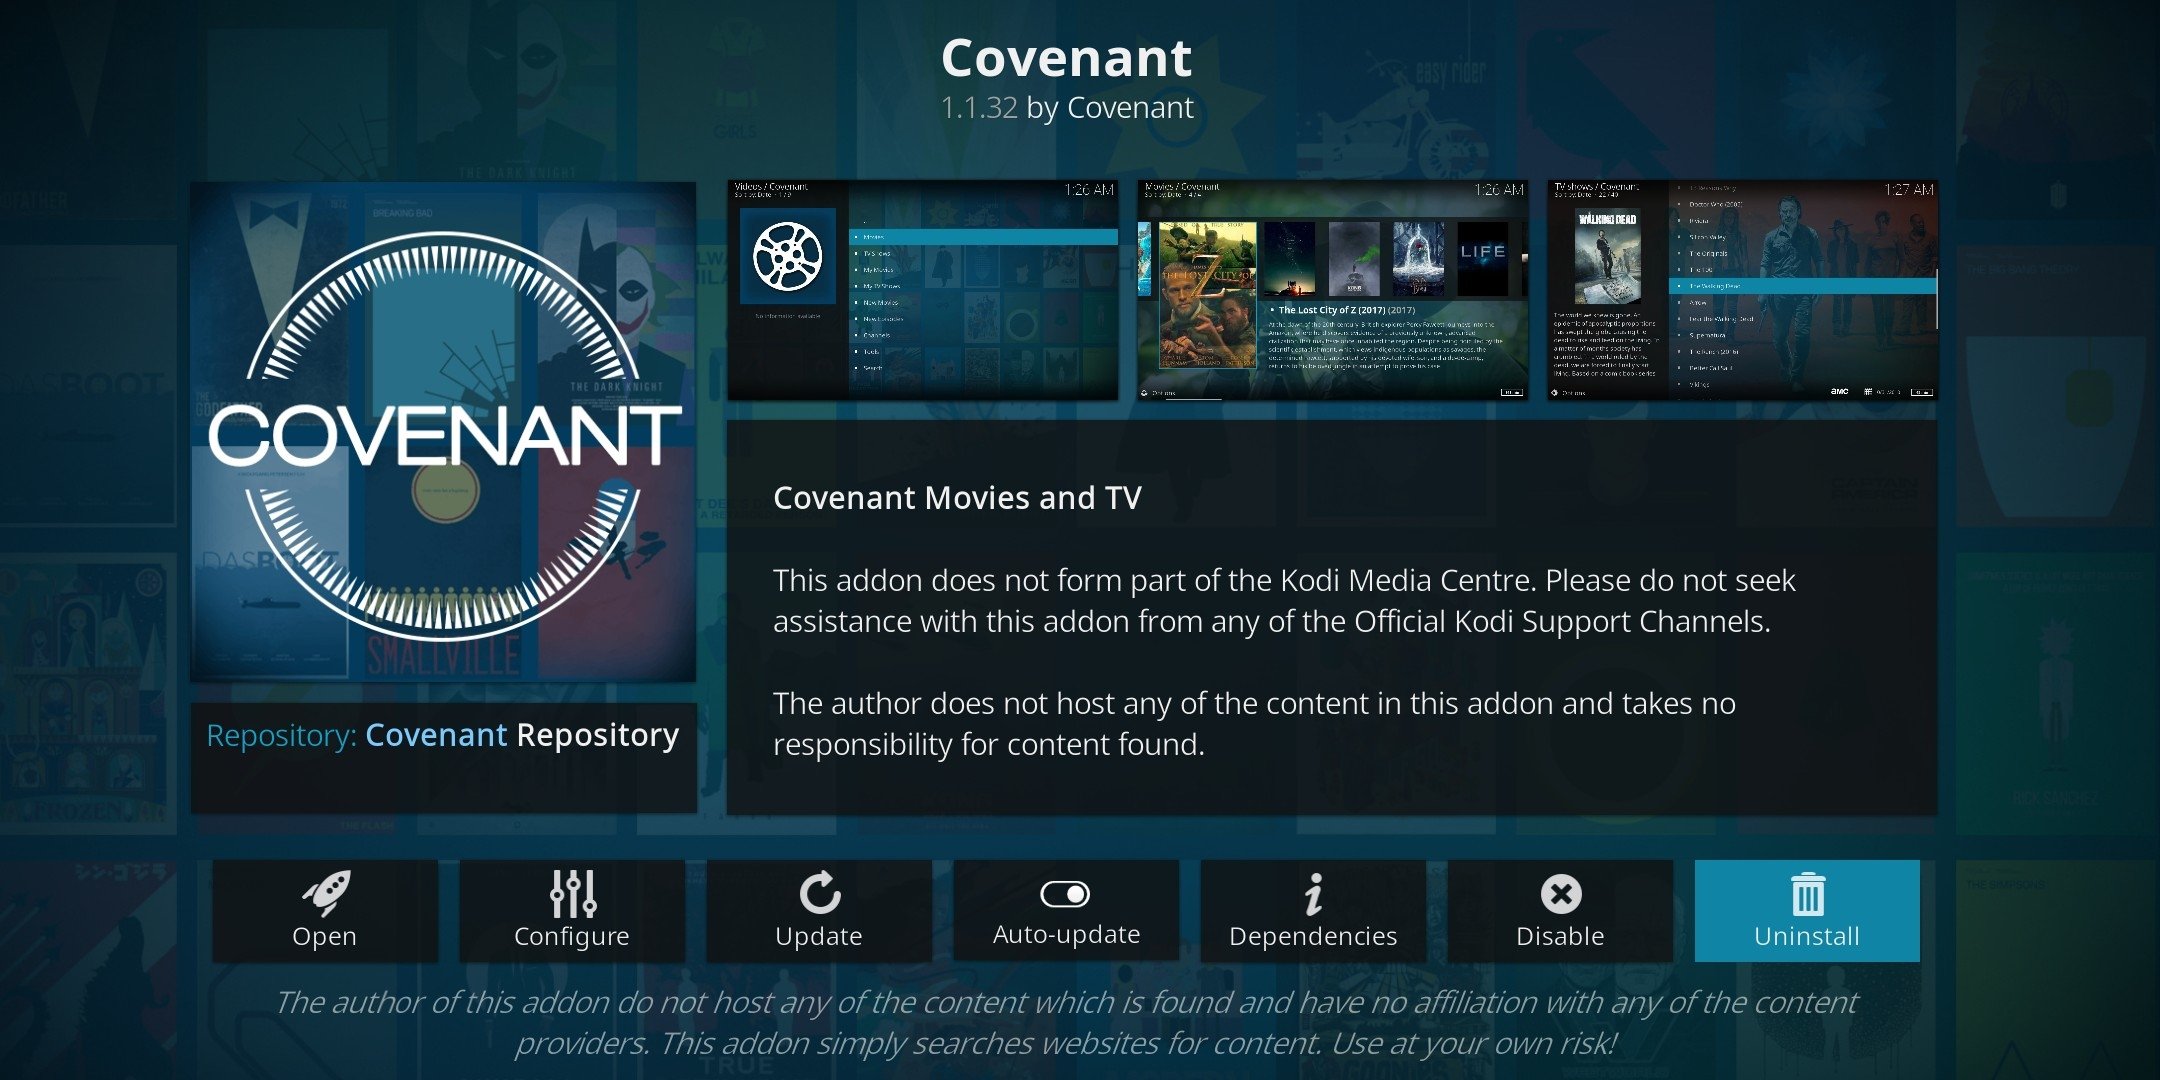 How To Download Movies On Covenant